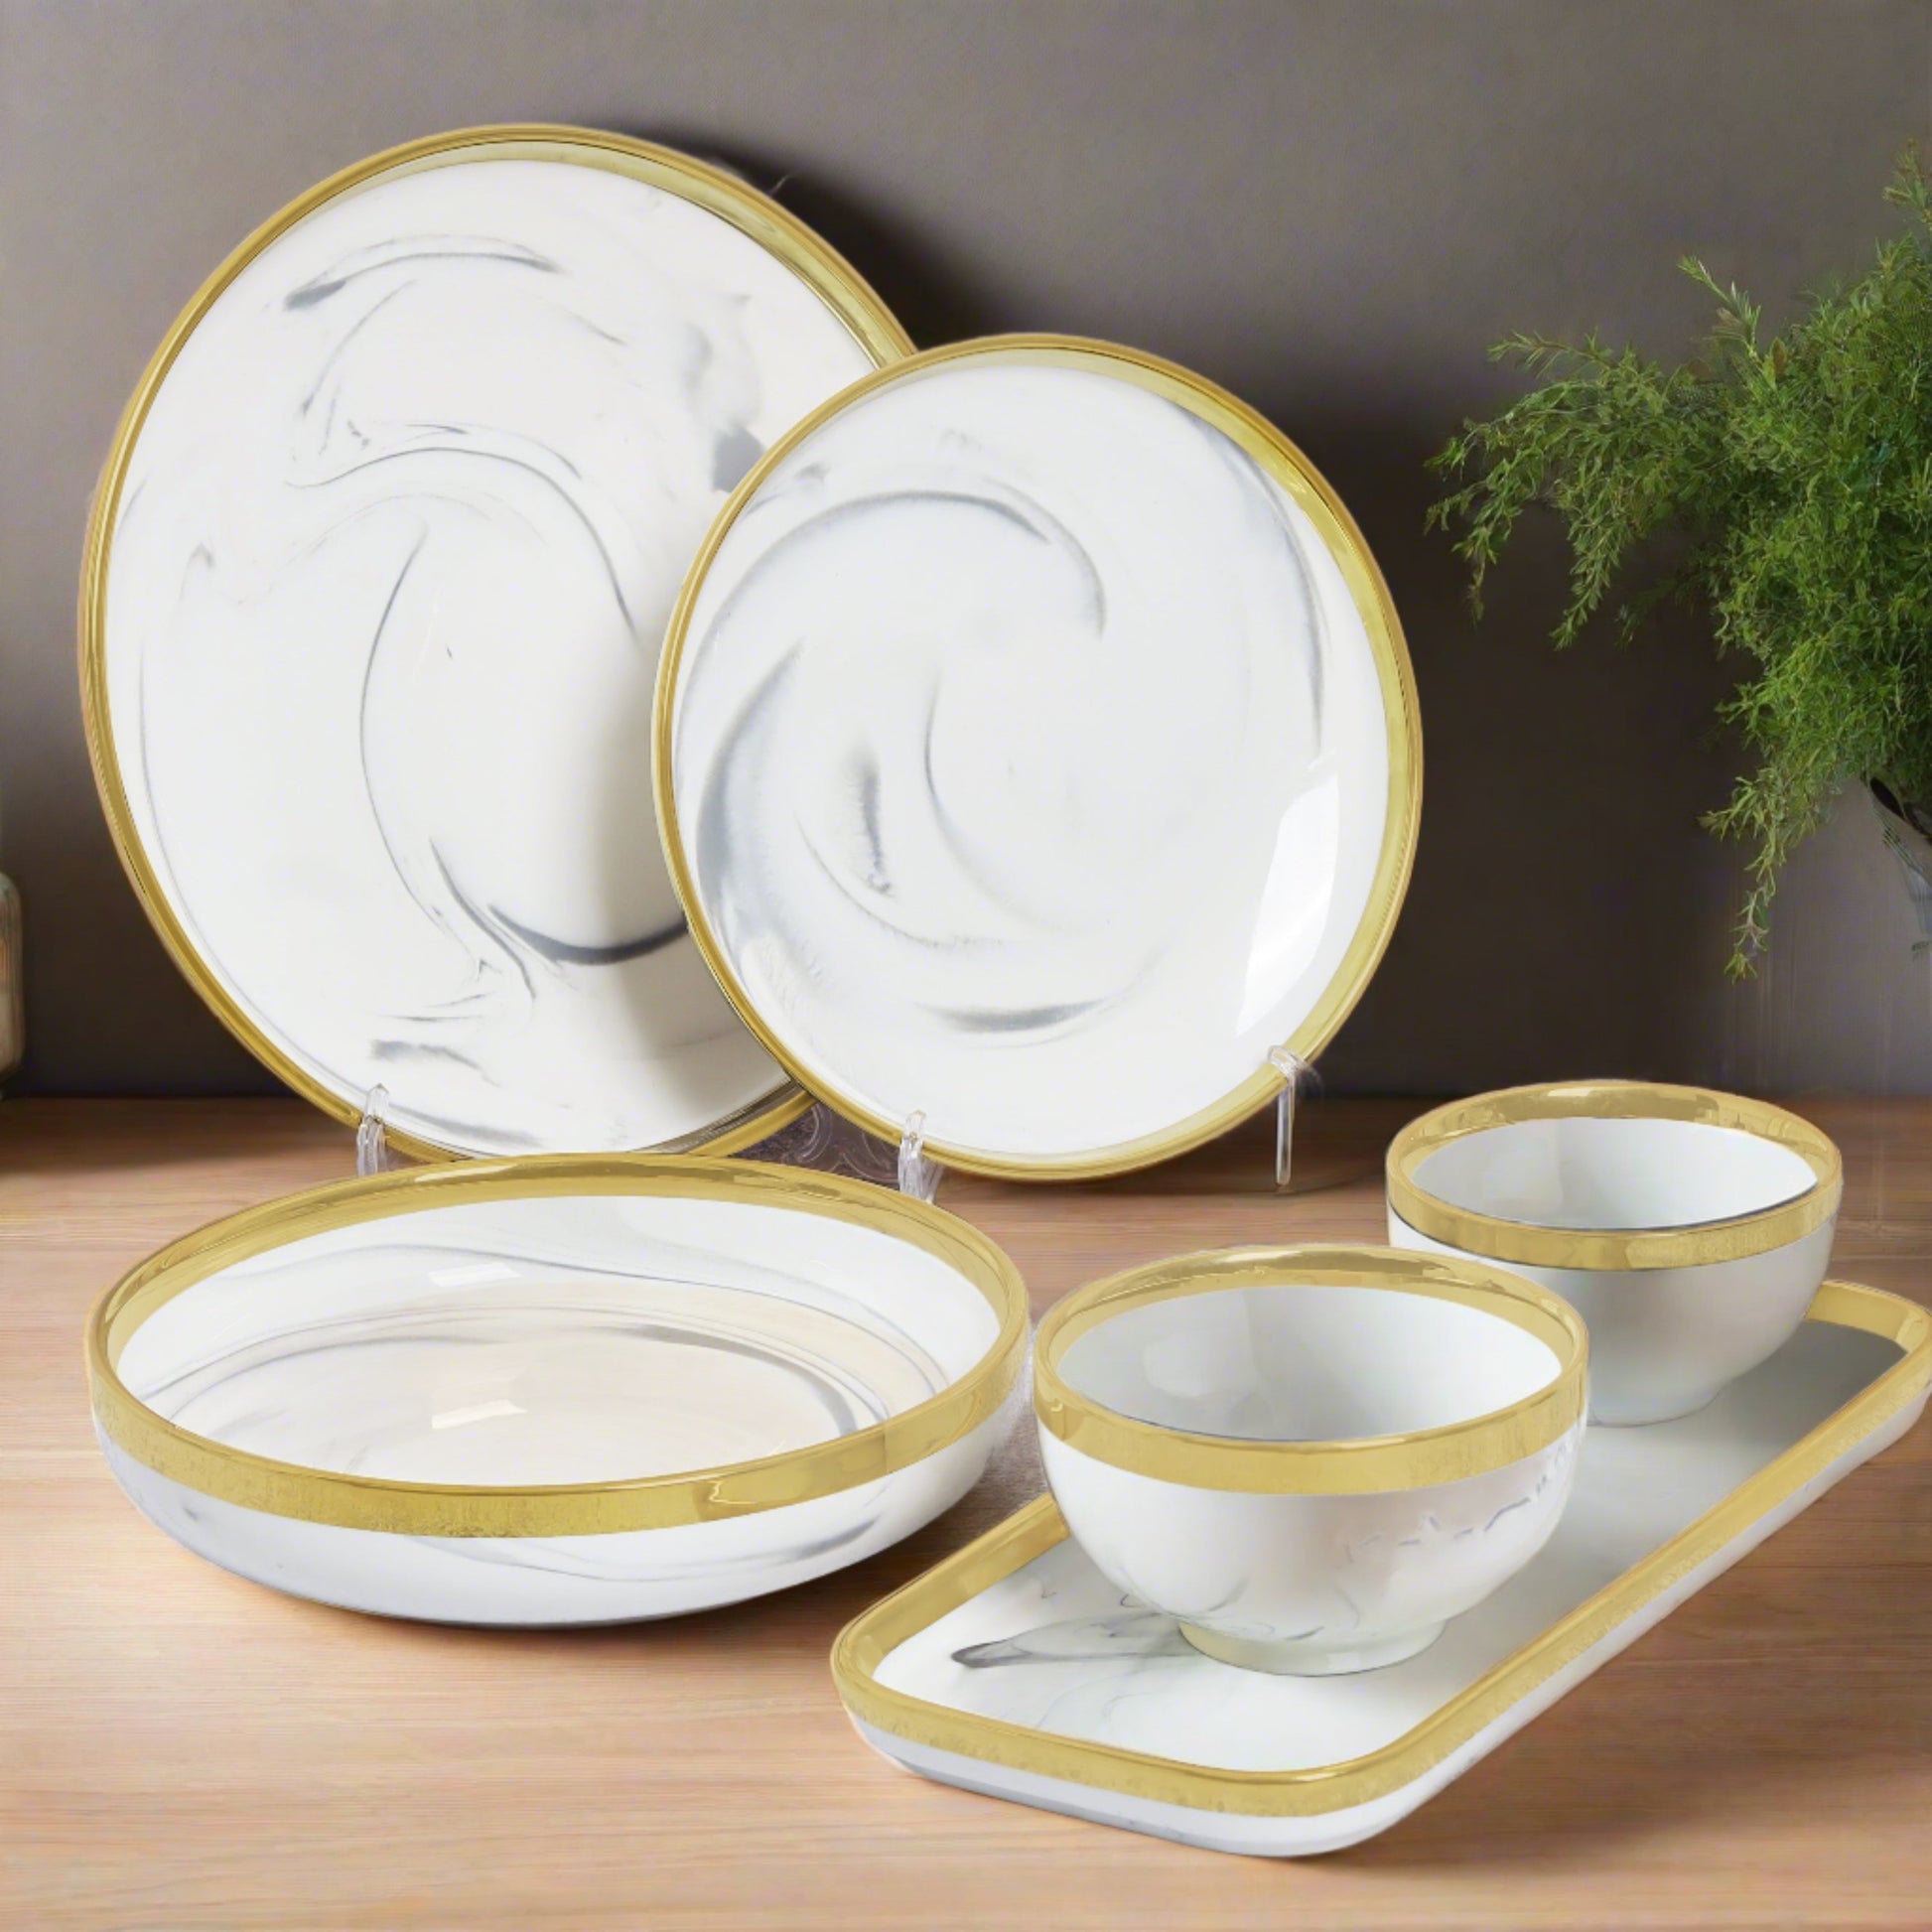 Complete 34-piece ceramic dinner set - ideal for elegant dining and entertaining